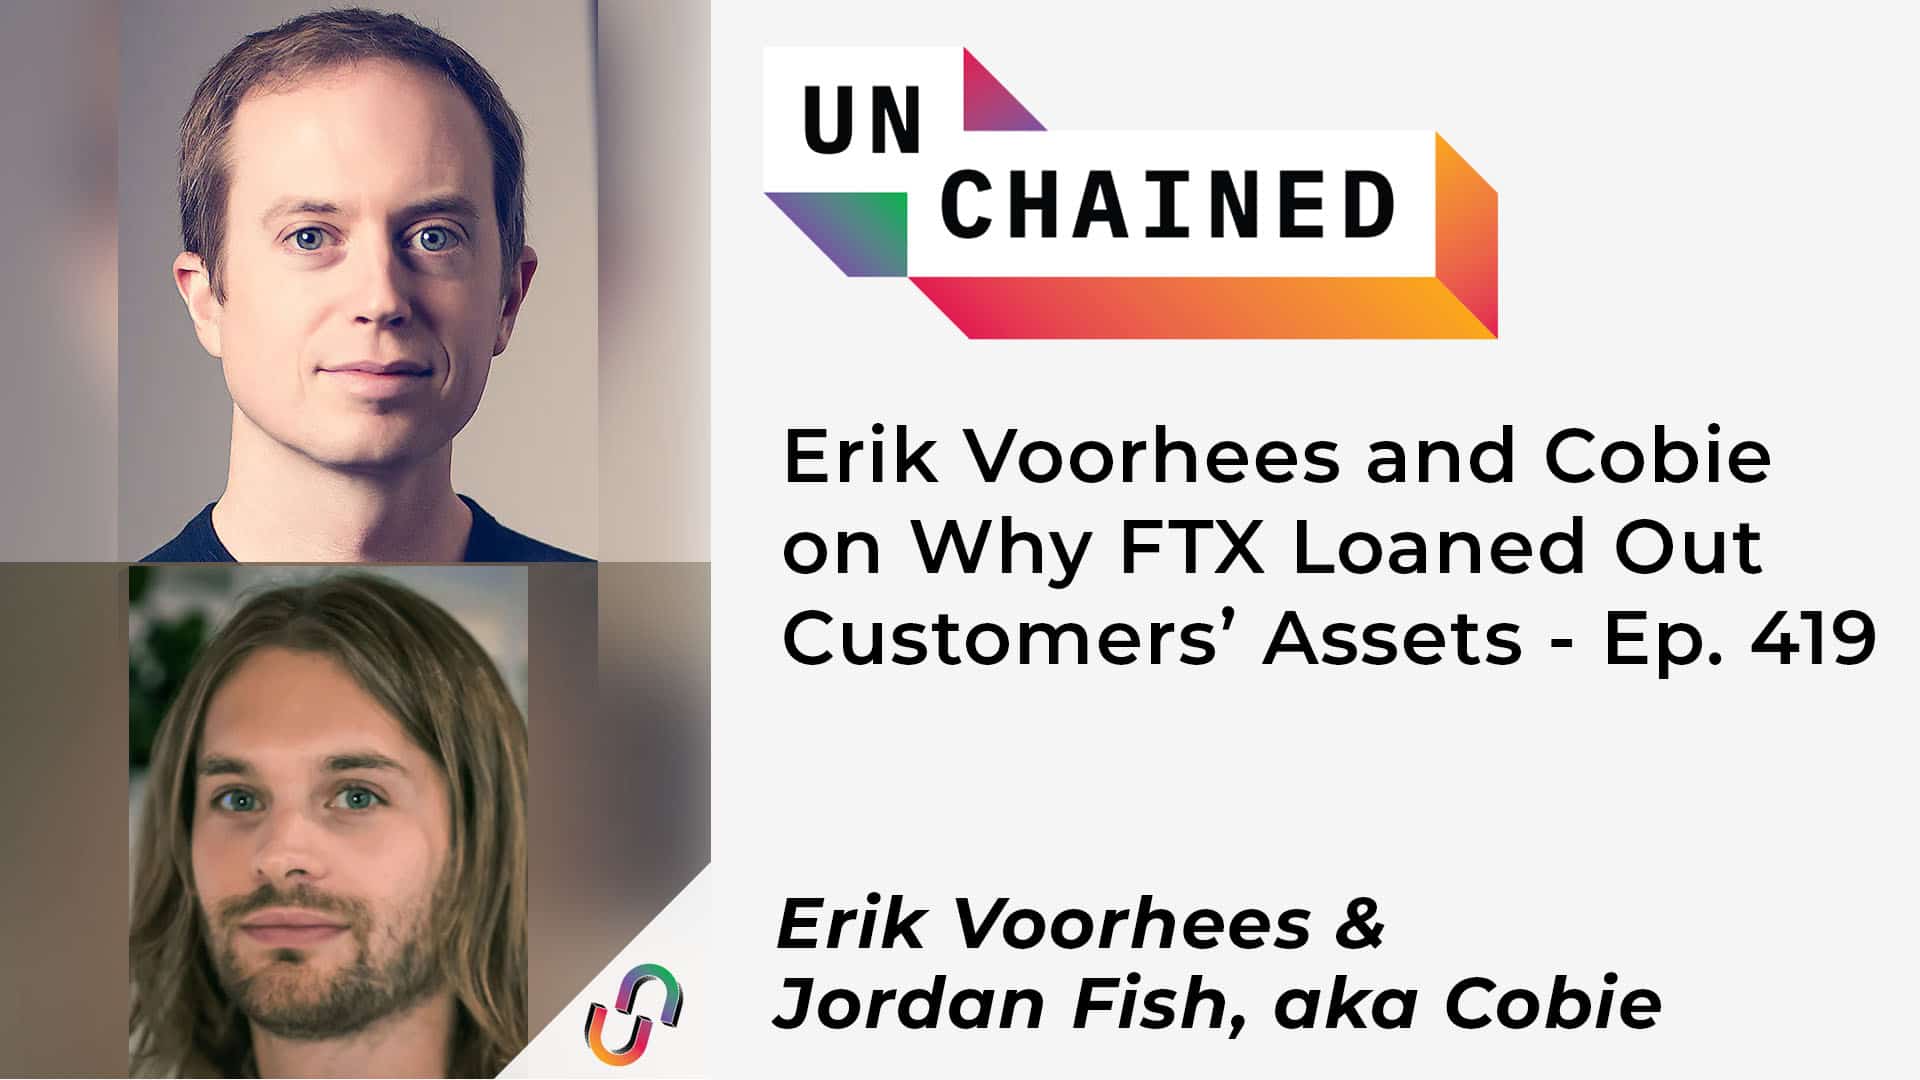 Erik Voorhees and Cobie on Why FTX Loaned Out Customers’ Assets - Ep. 419